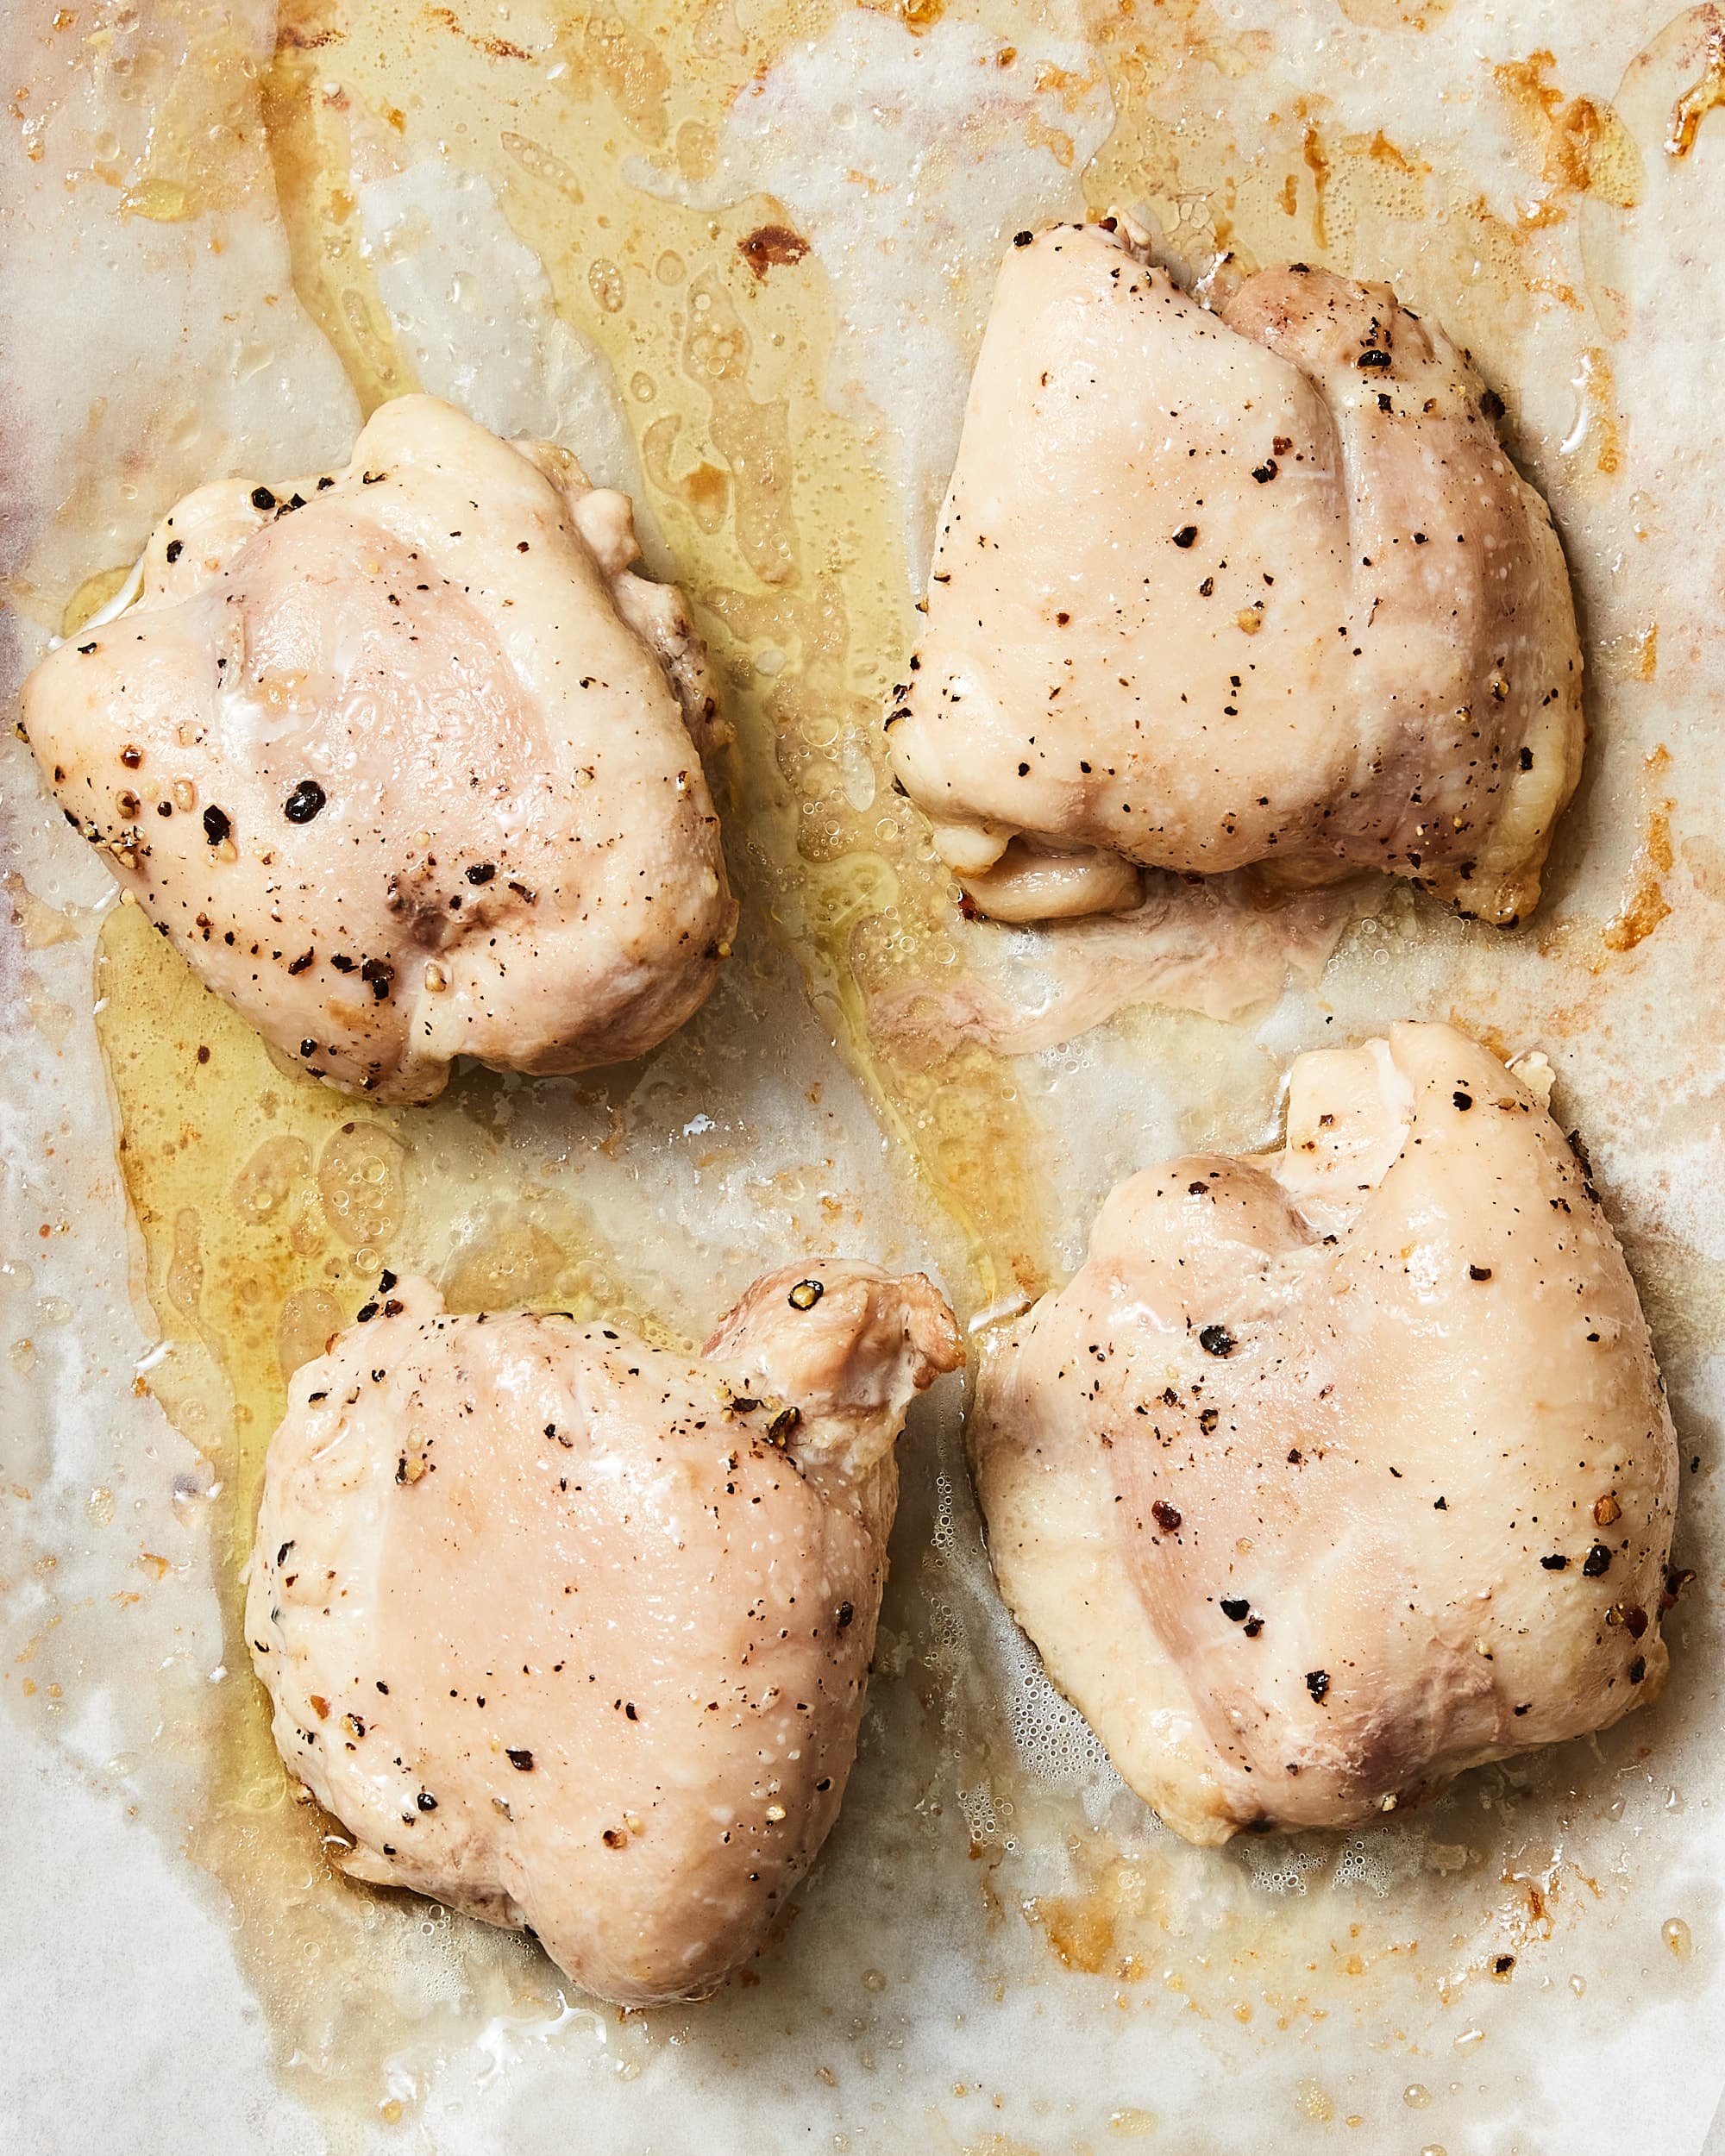 Slow Cooker Chicken Thighs - The Almond Eater